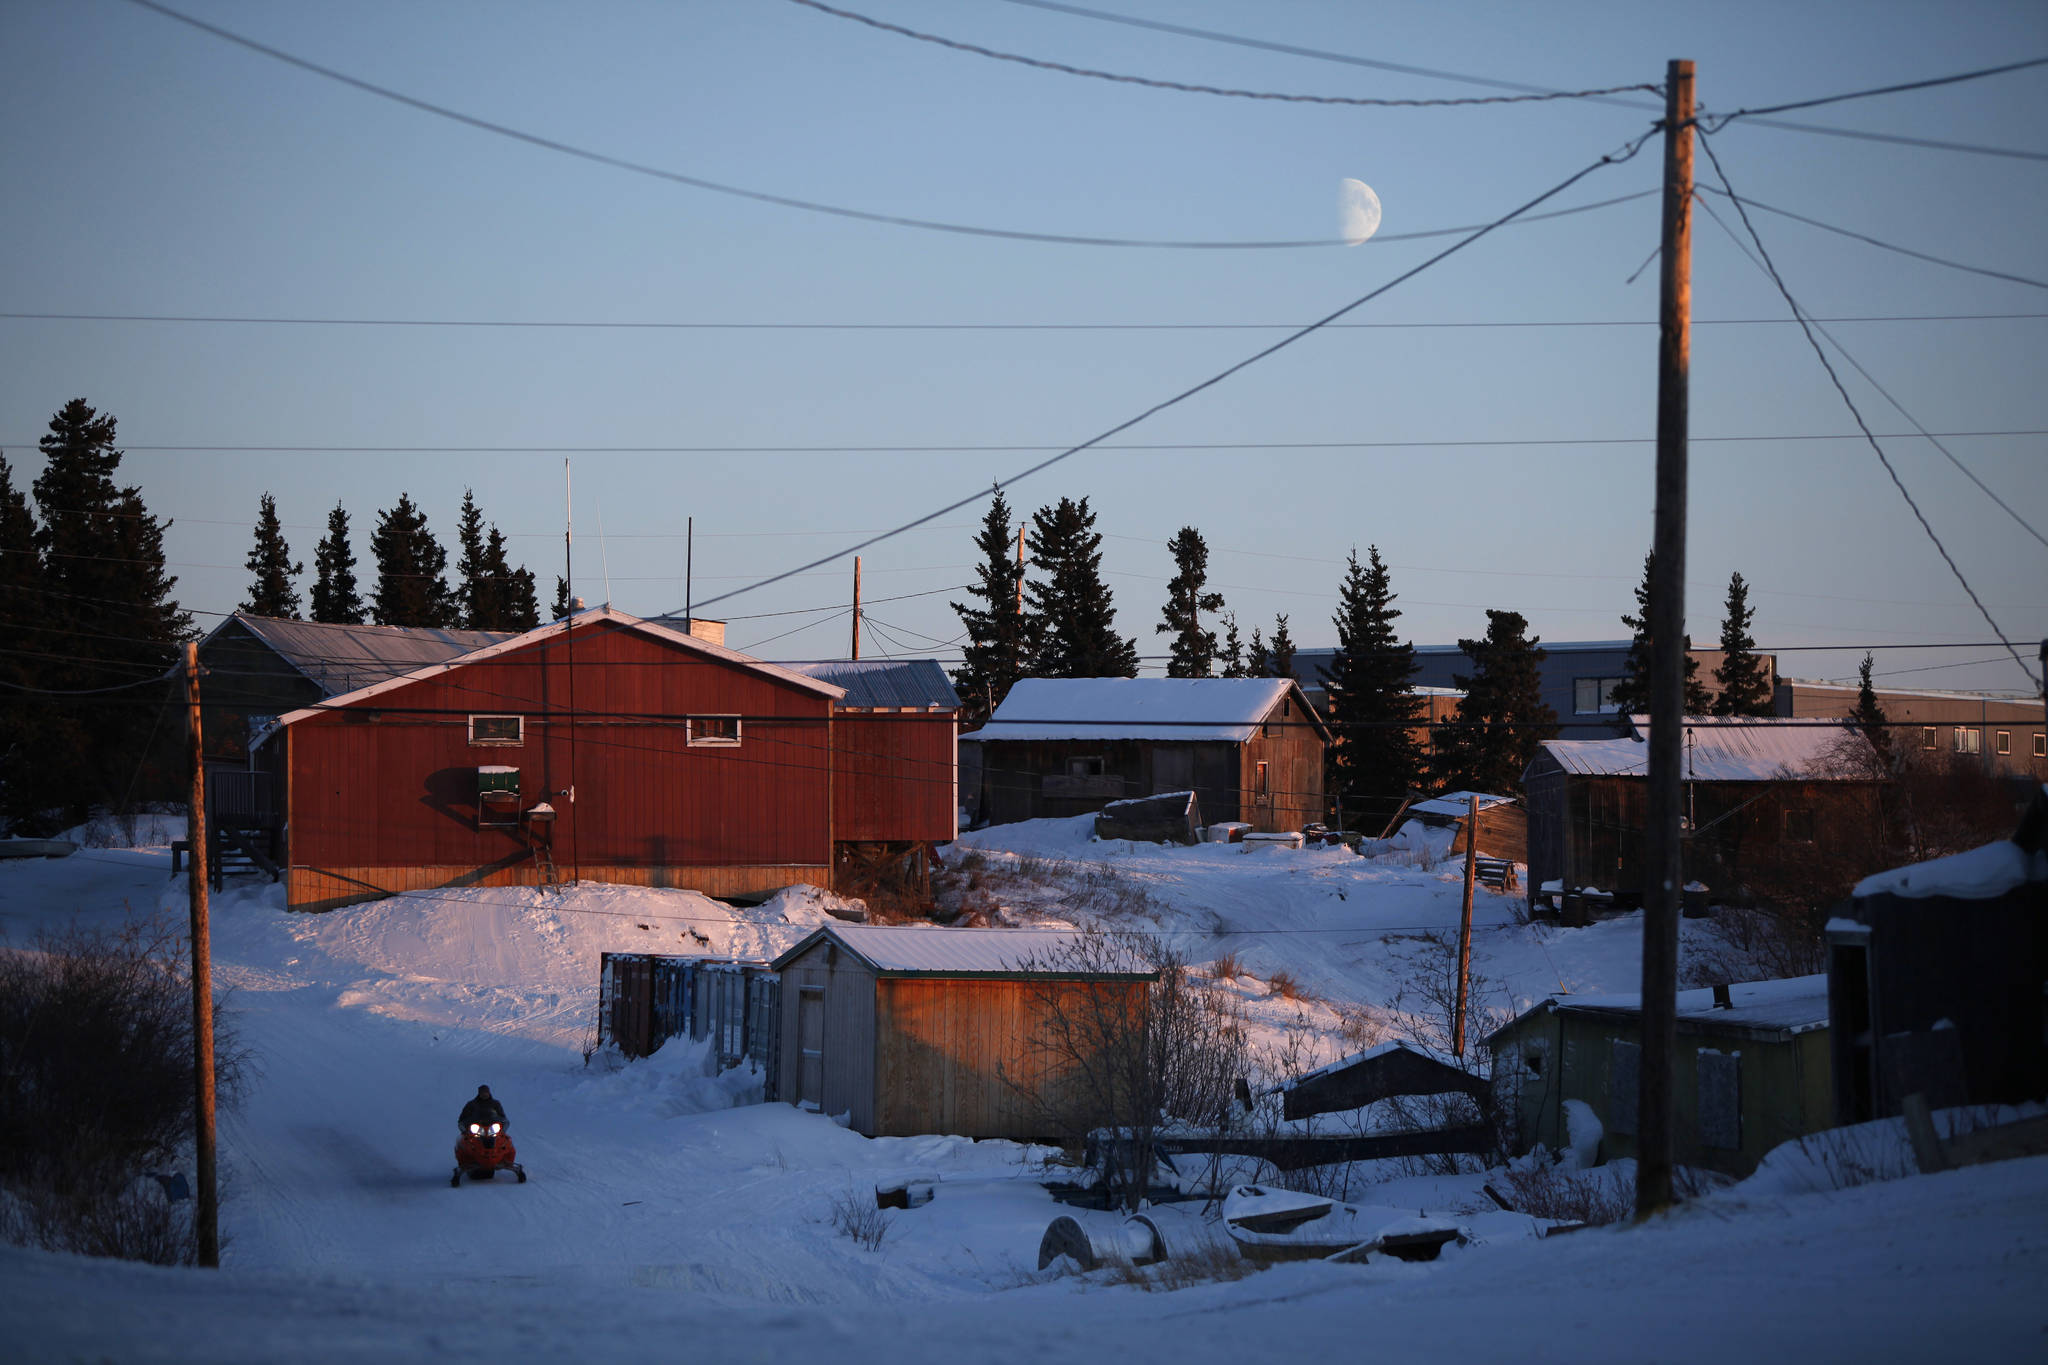 In this Jan. 24, 2010 file photo, the moon hangs low in the sky over the remote Inupiat Eskimo village Noorvik. Gov.-elect Mike Dunleavy will become Alaska’s top elected official Dec. 3, when he takes the oath of office in Noorvik. (AP Photo/Carolyn Kaster, File)